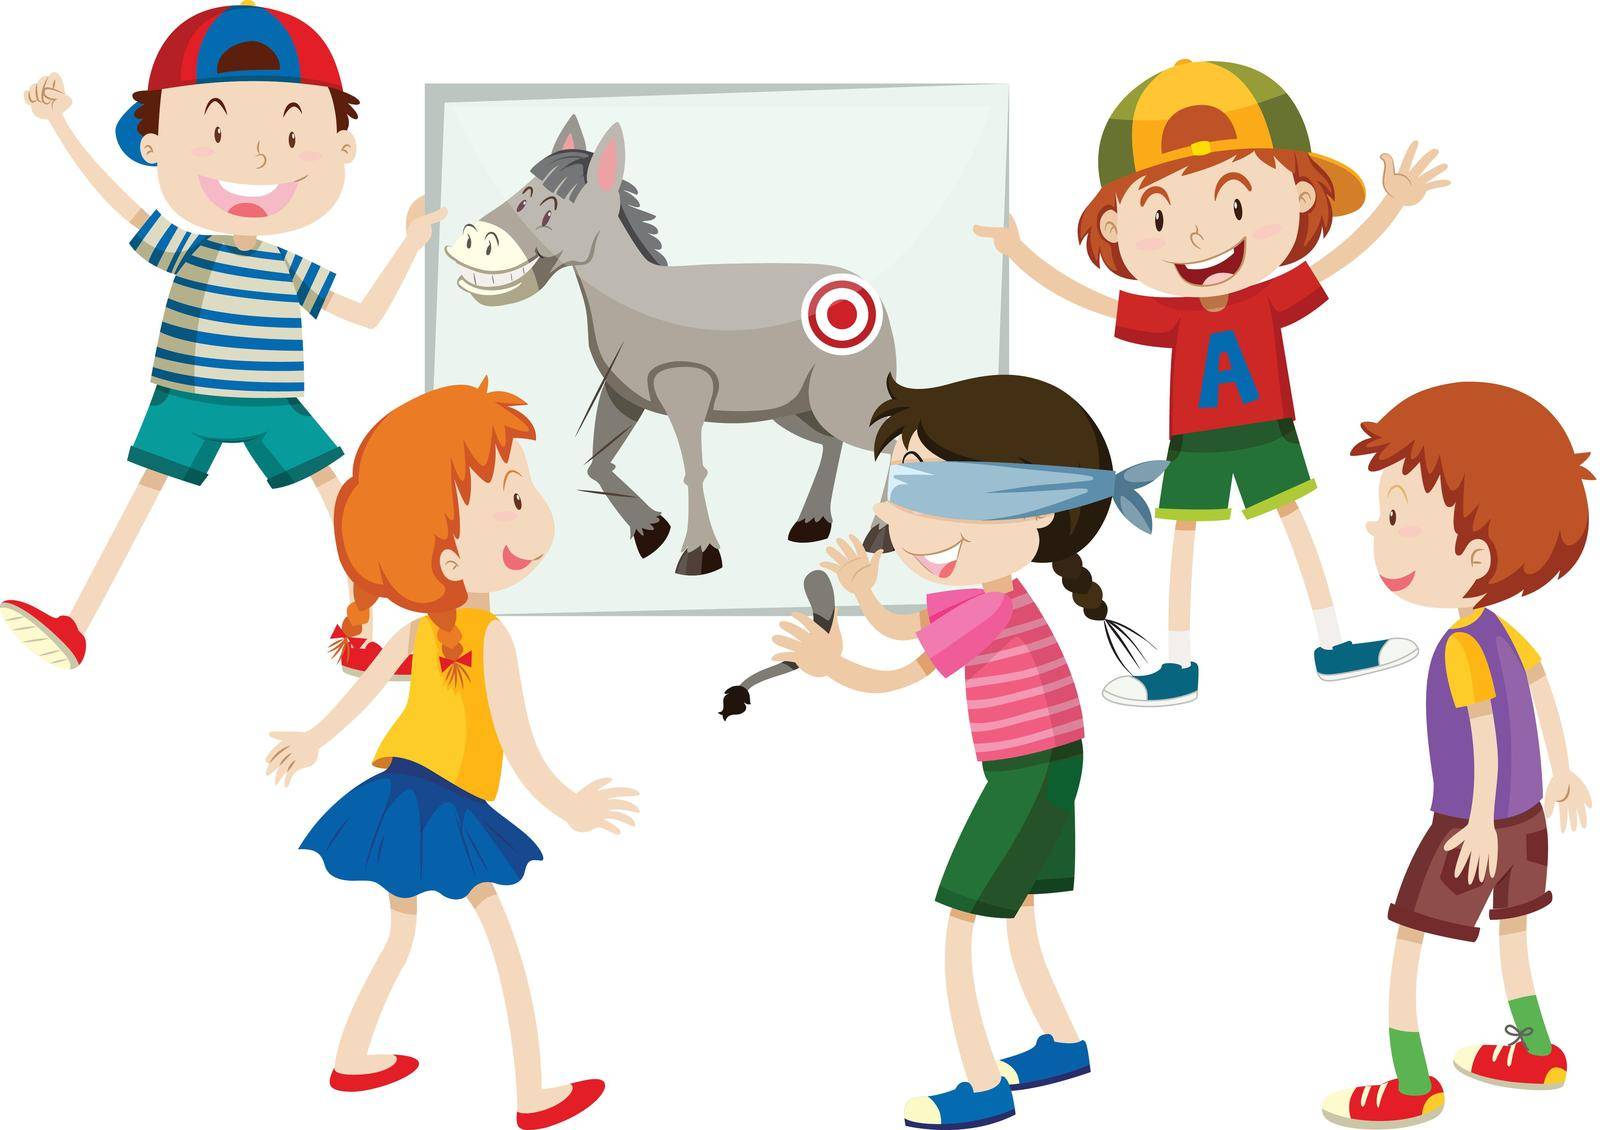 pin the tail on the donkey illustration